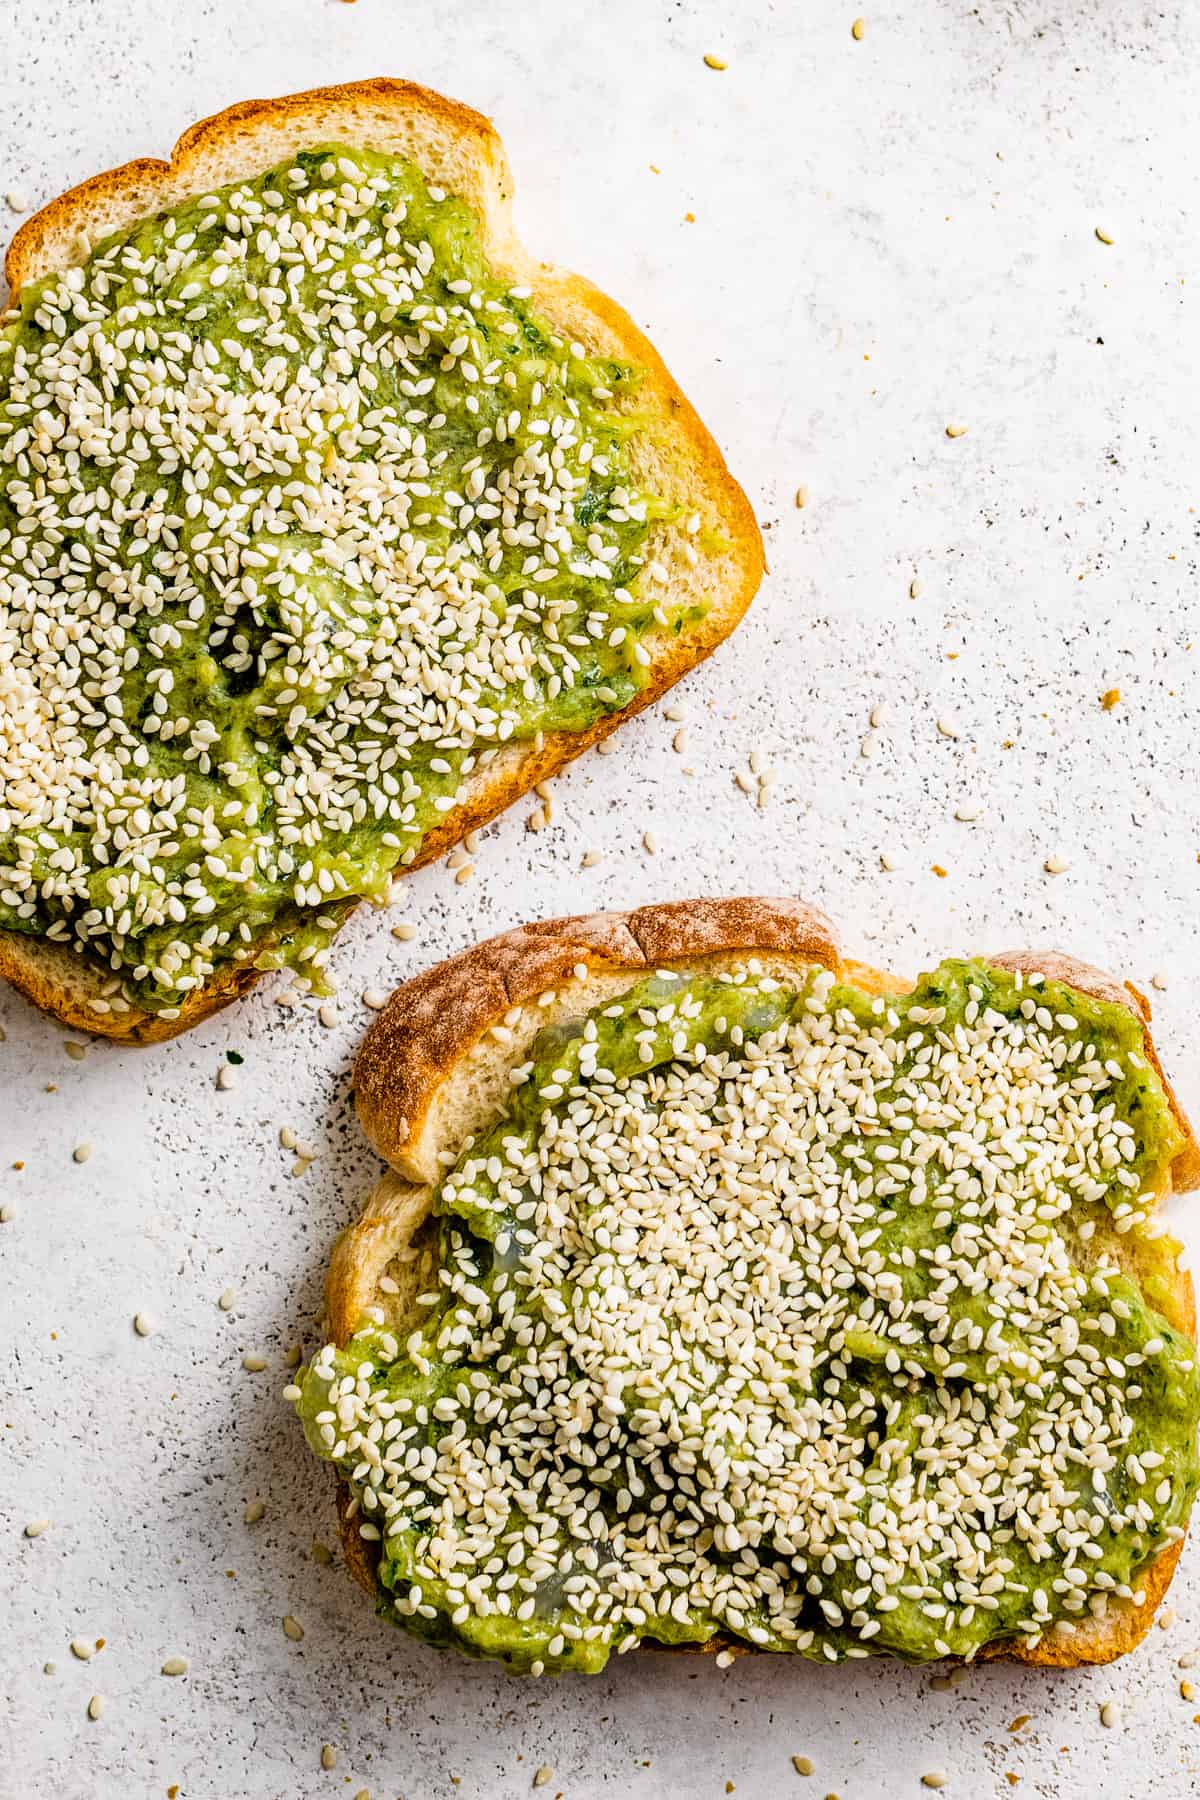 Two slices of sandwich bread topped with a green shrimp mixture and a layer of sesame seeds.